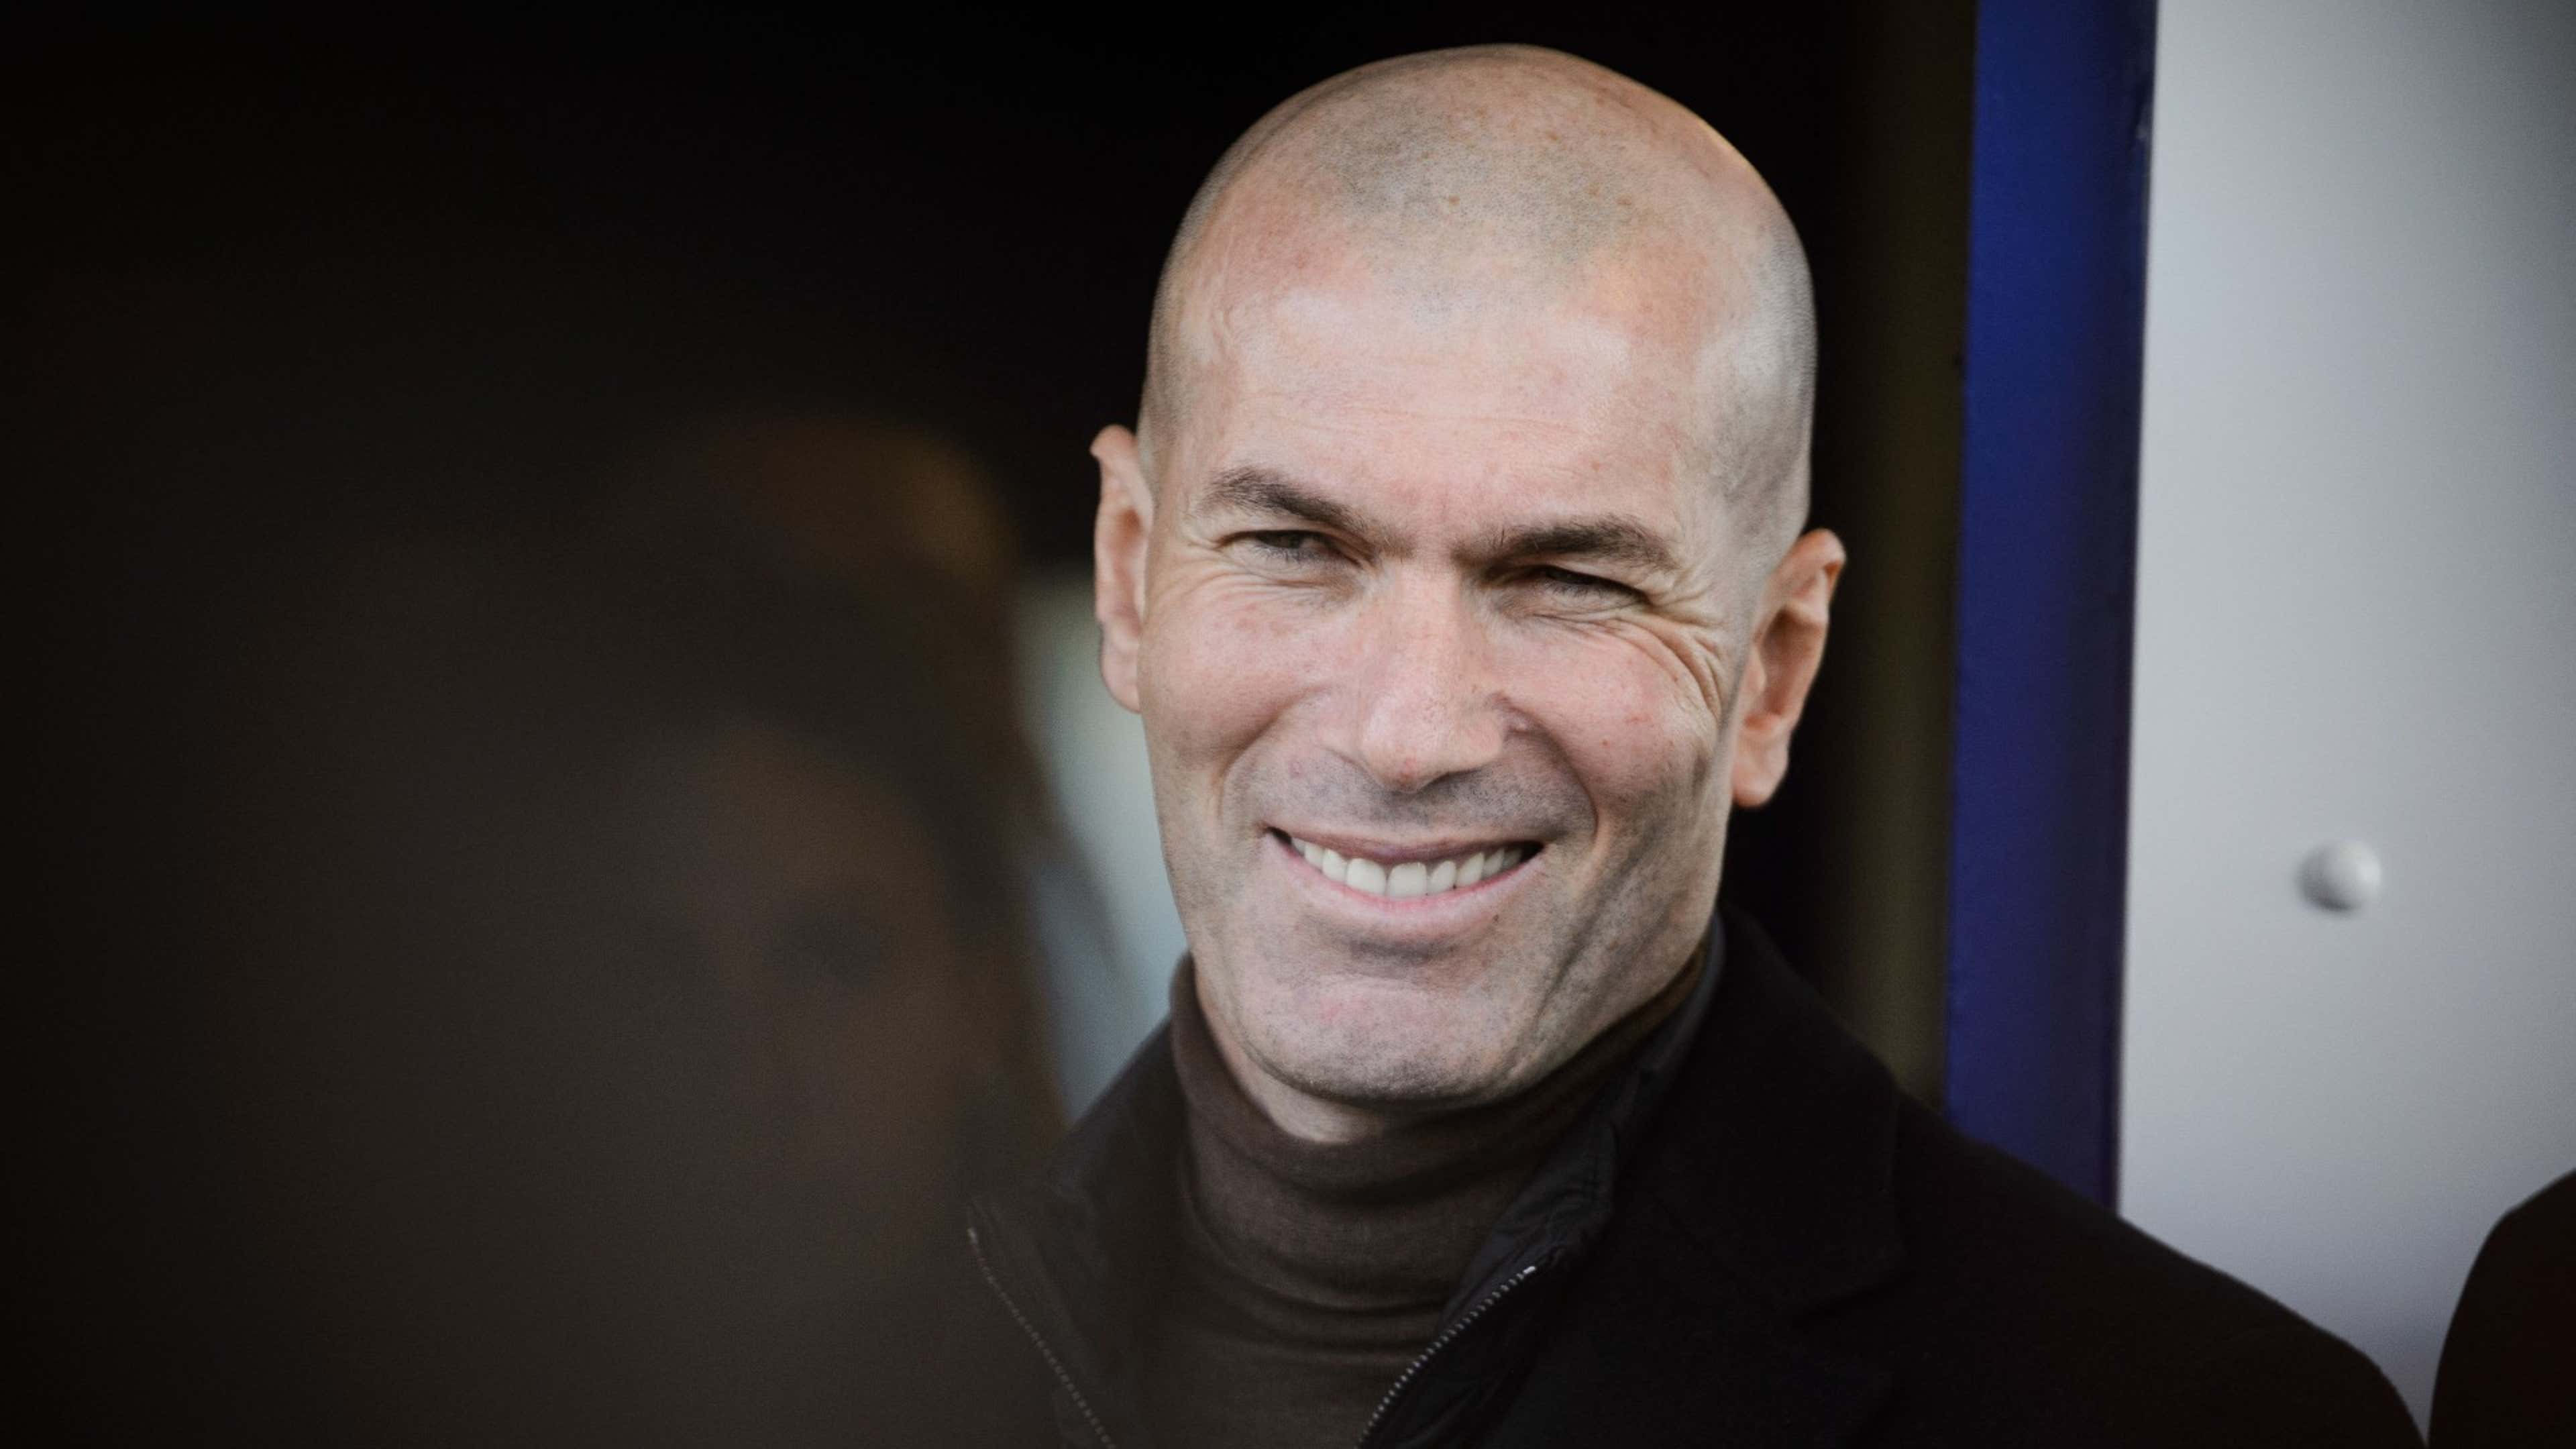 I have a lot left to give' - Zidane suggests he'll return to